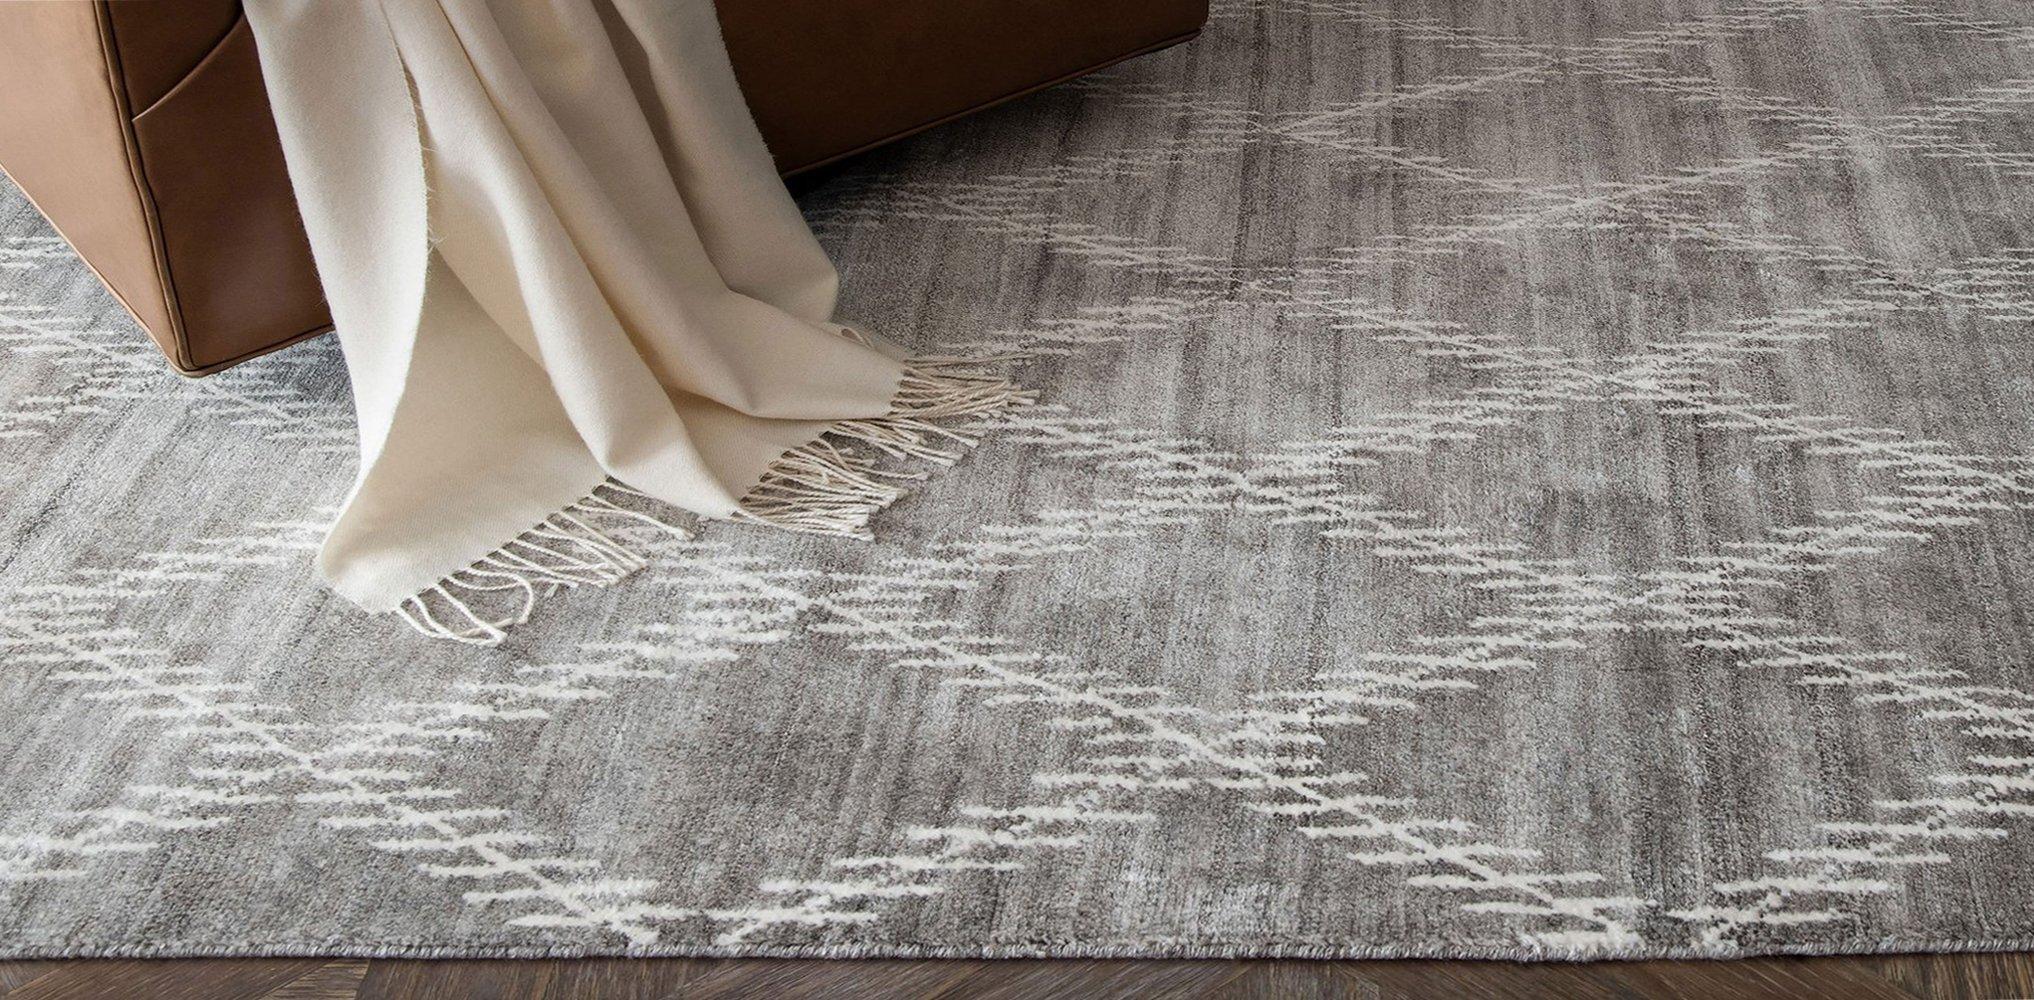 Indian Ben Soleimani Rama Rug– Hand-knotted Plush Viscose Fog 9'x12' For Sale